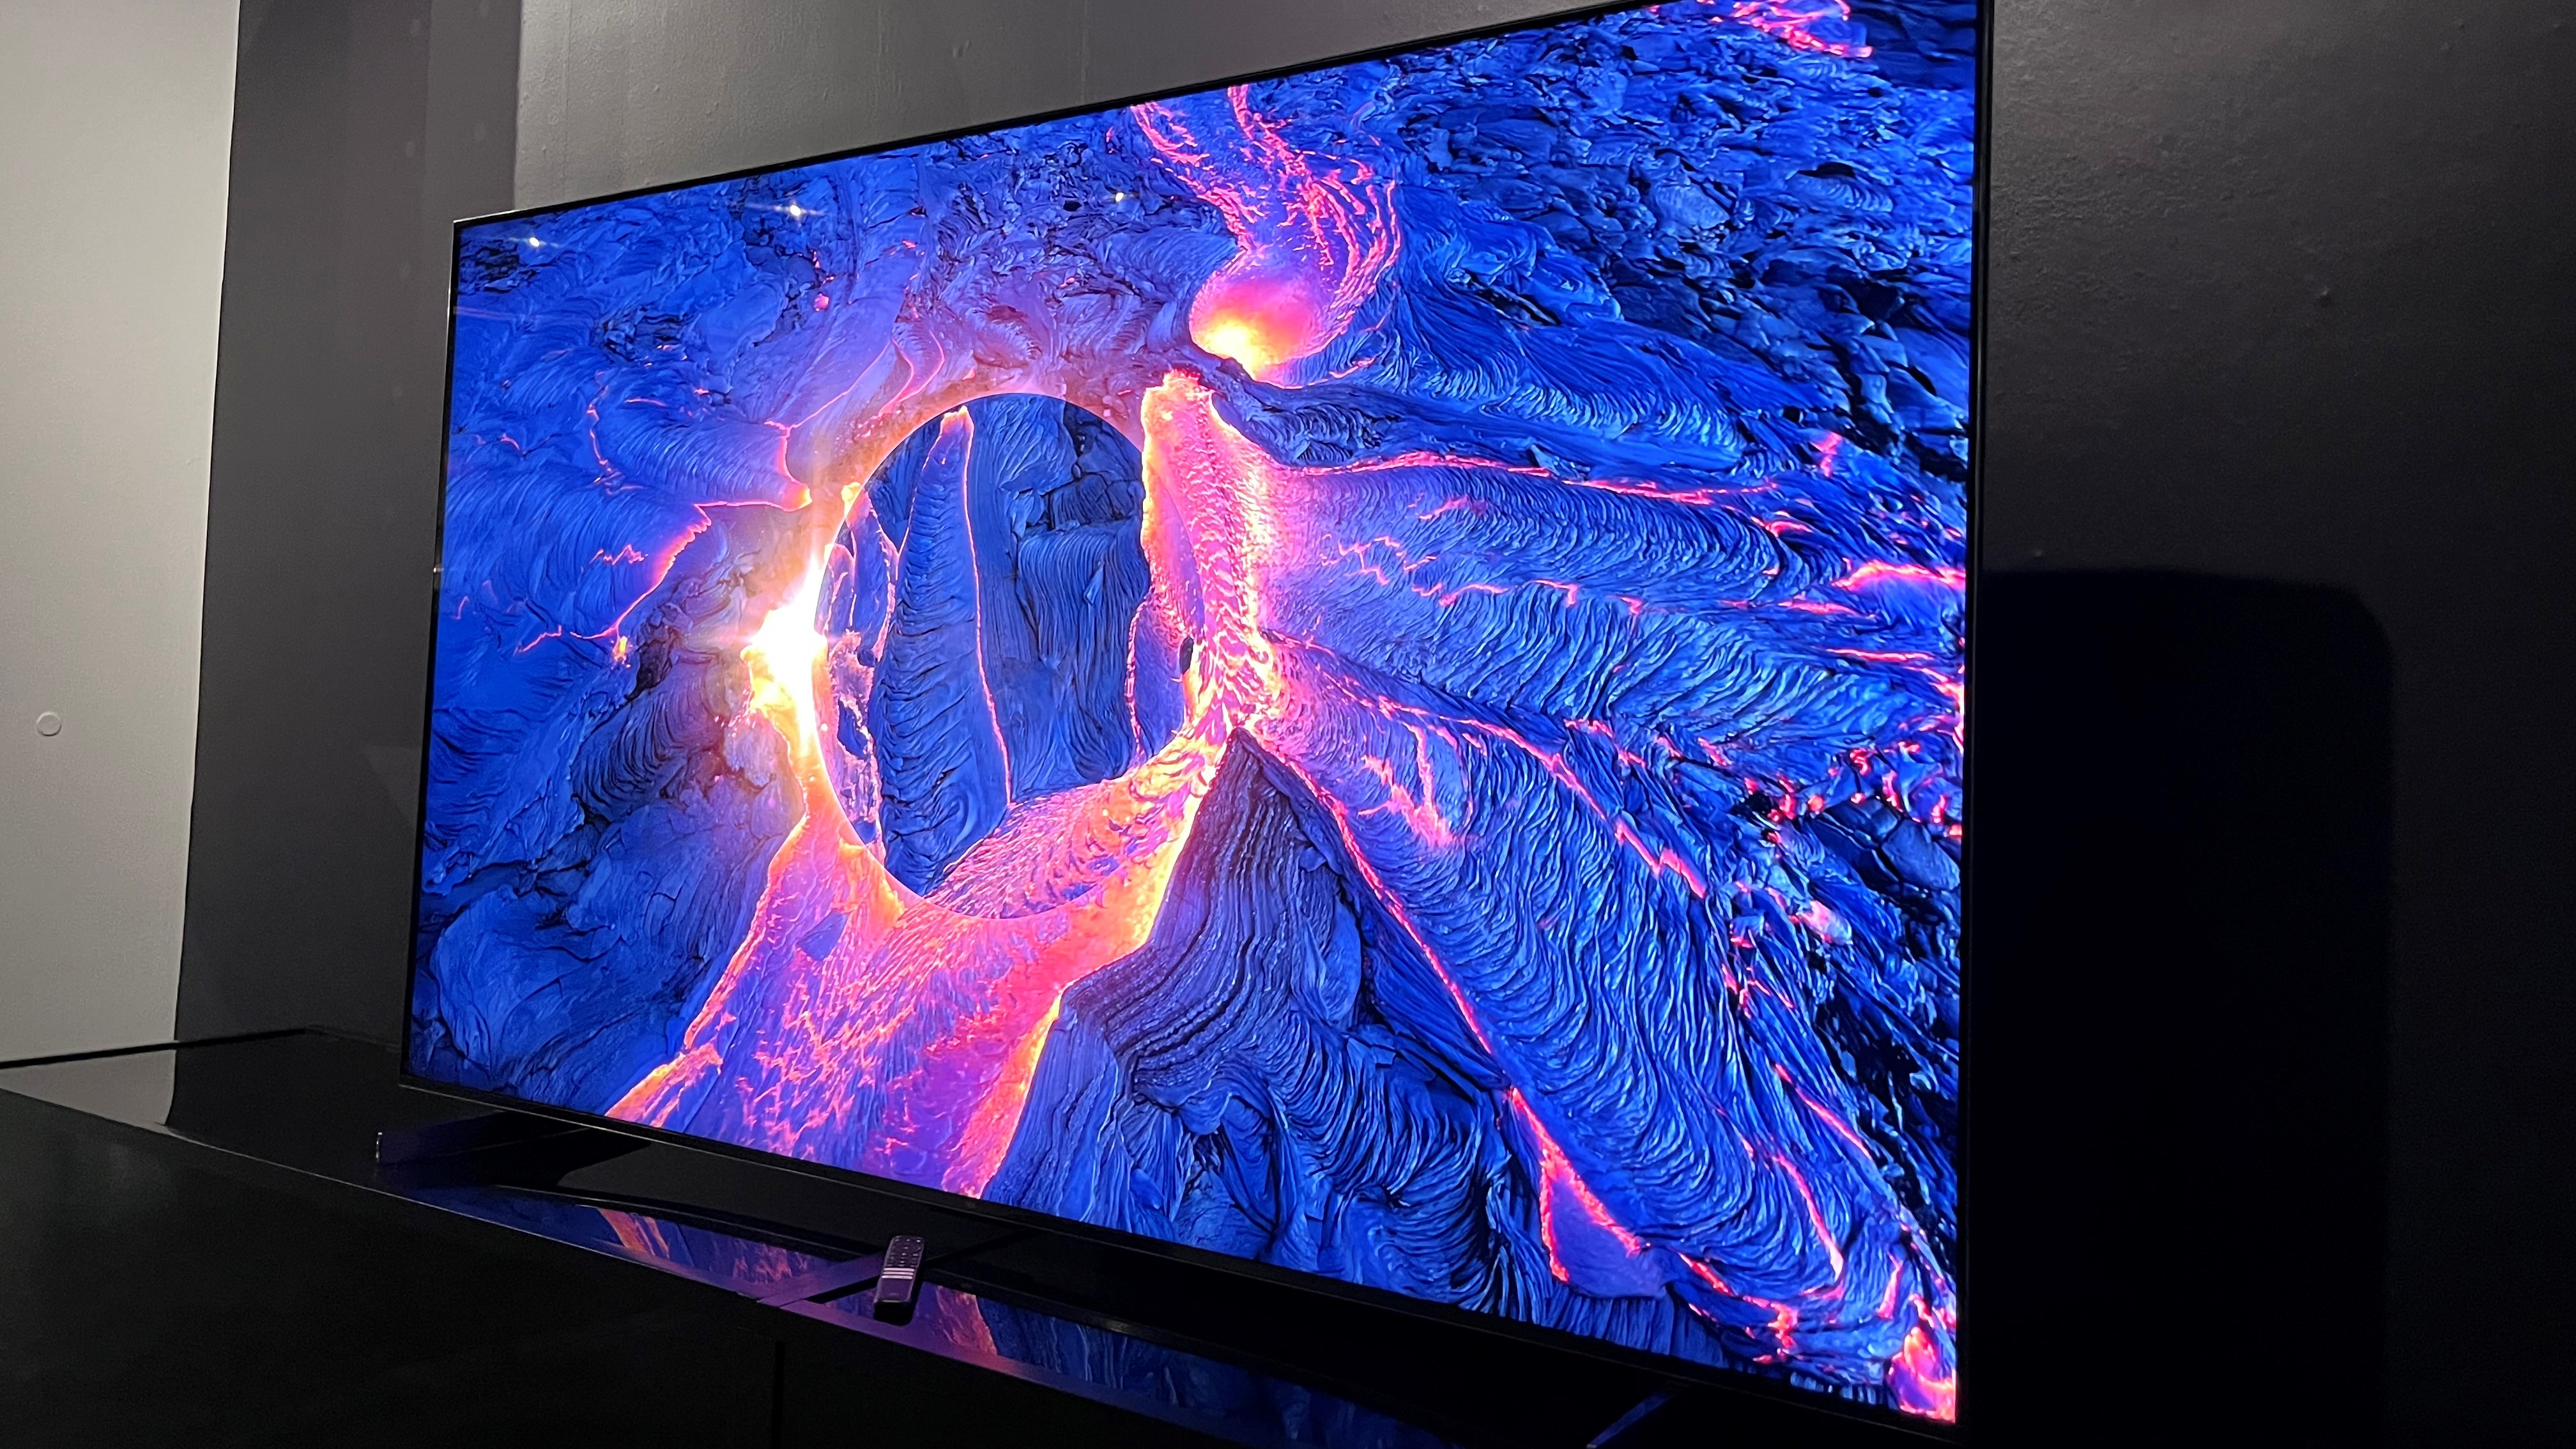 TCL QM8 QLED TV Review: Top-Notch Brightness for an Incredible Price